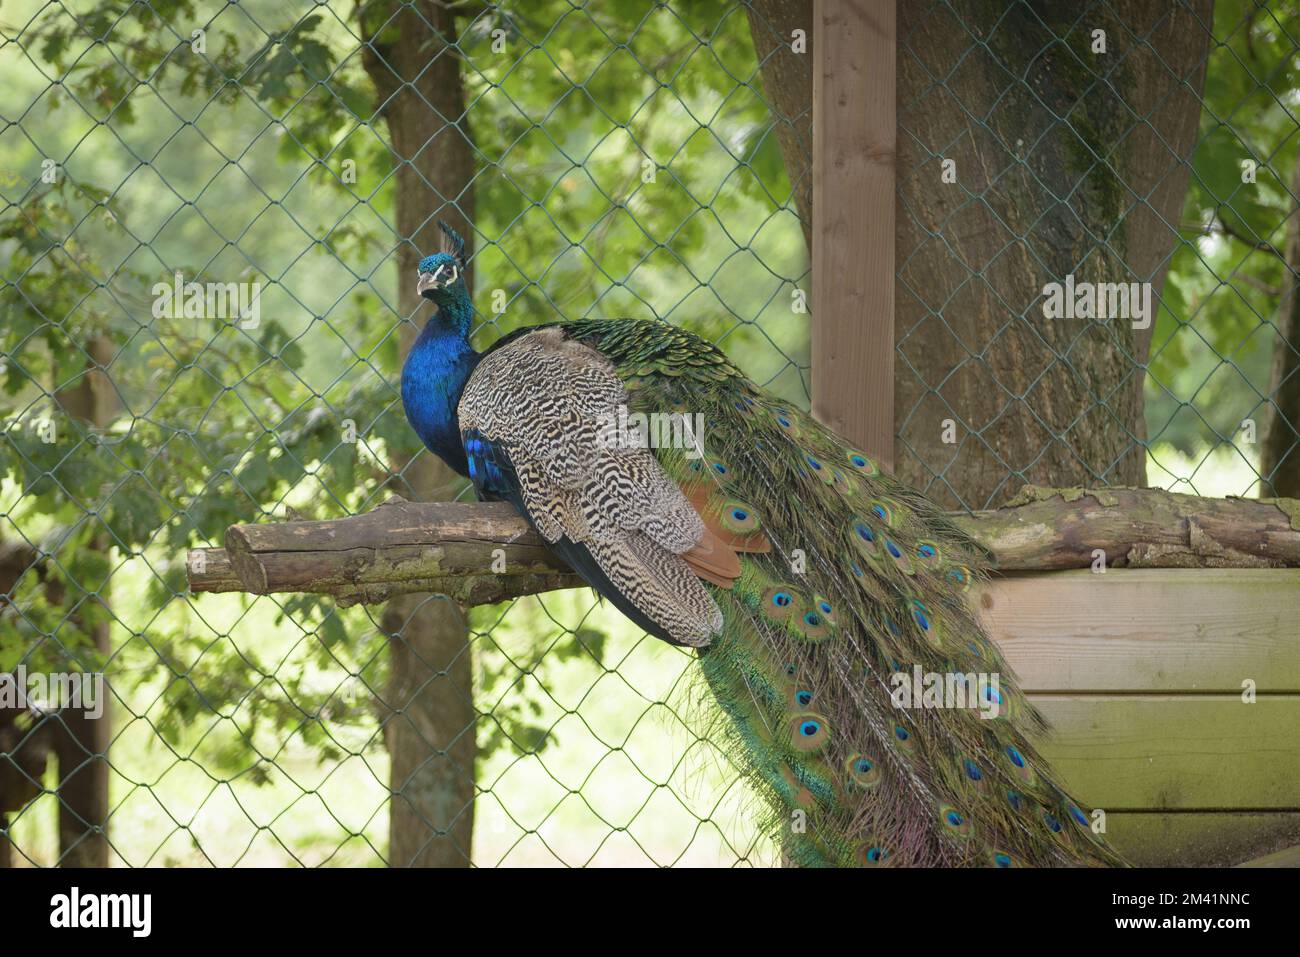 Male peacock bird with long tail Stock Photo